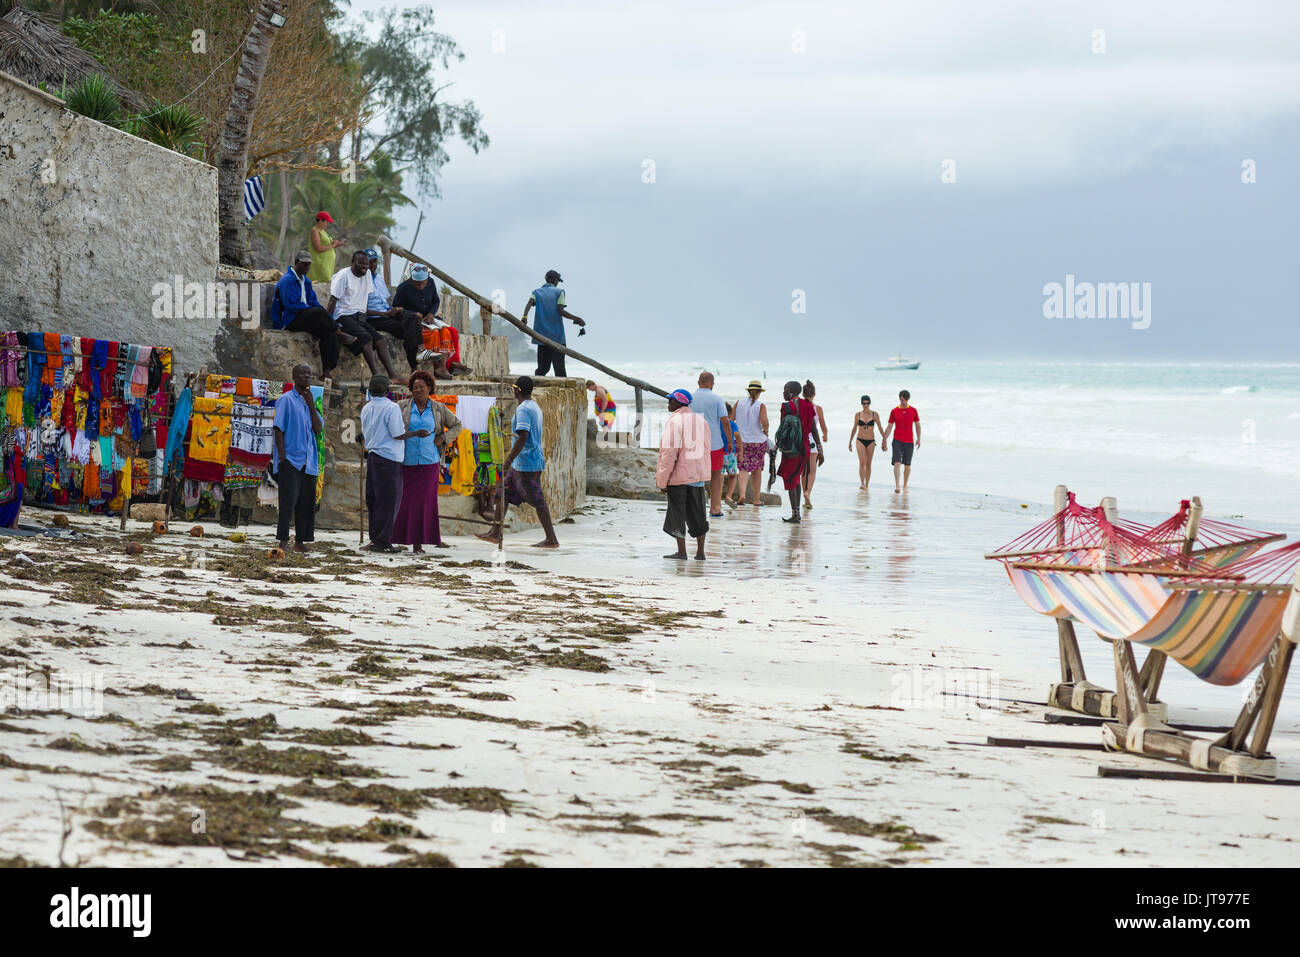 Locals wait by their stalls ib the beach to sell goods to tourists walking by at the nearby resort, Diani, Kenya Stock Photo